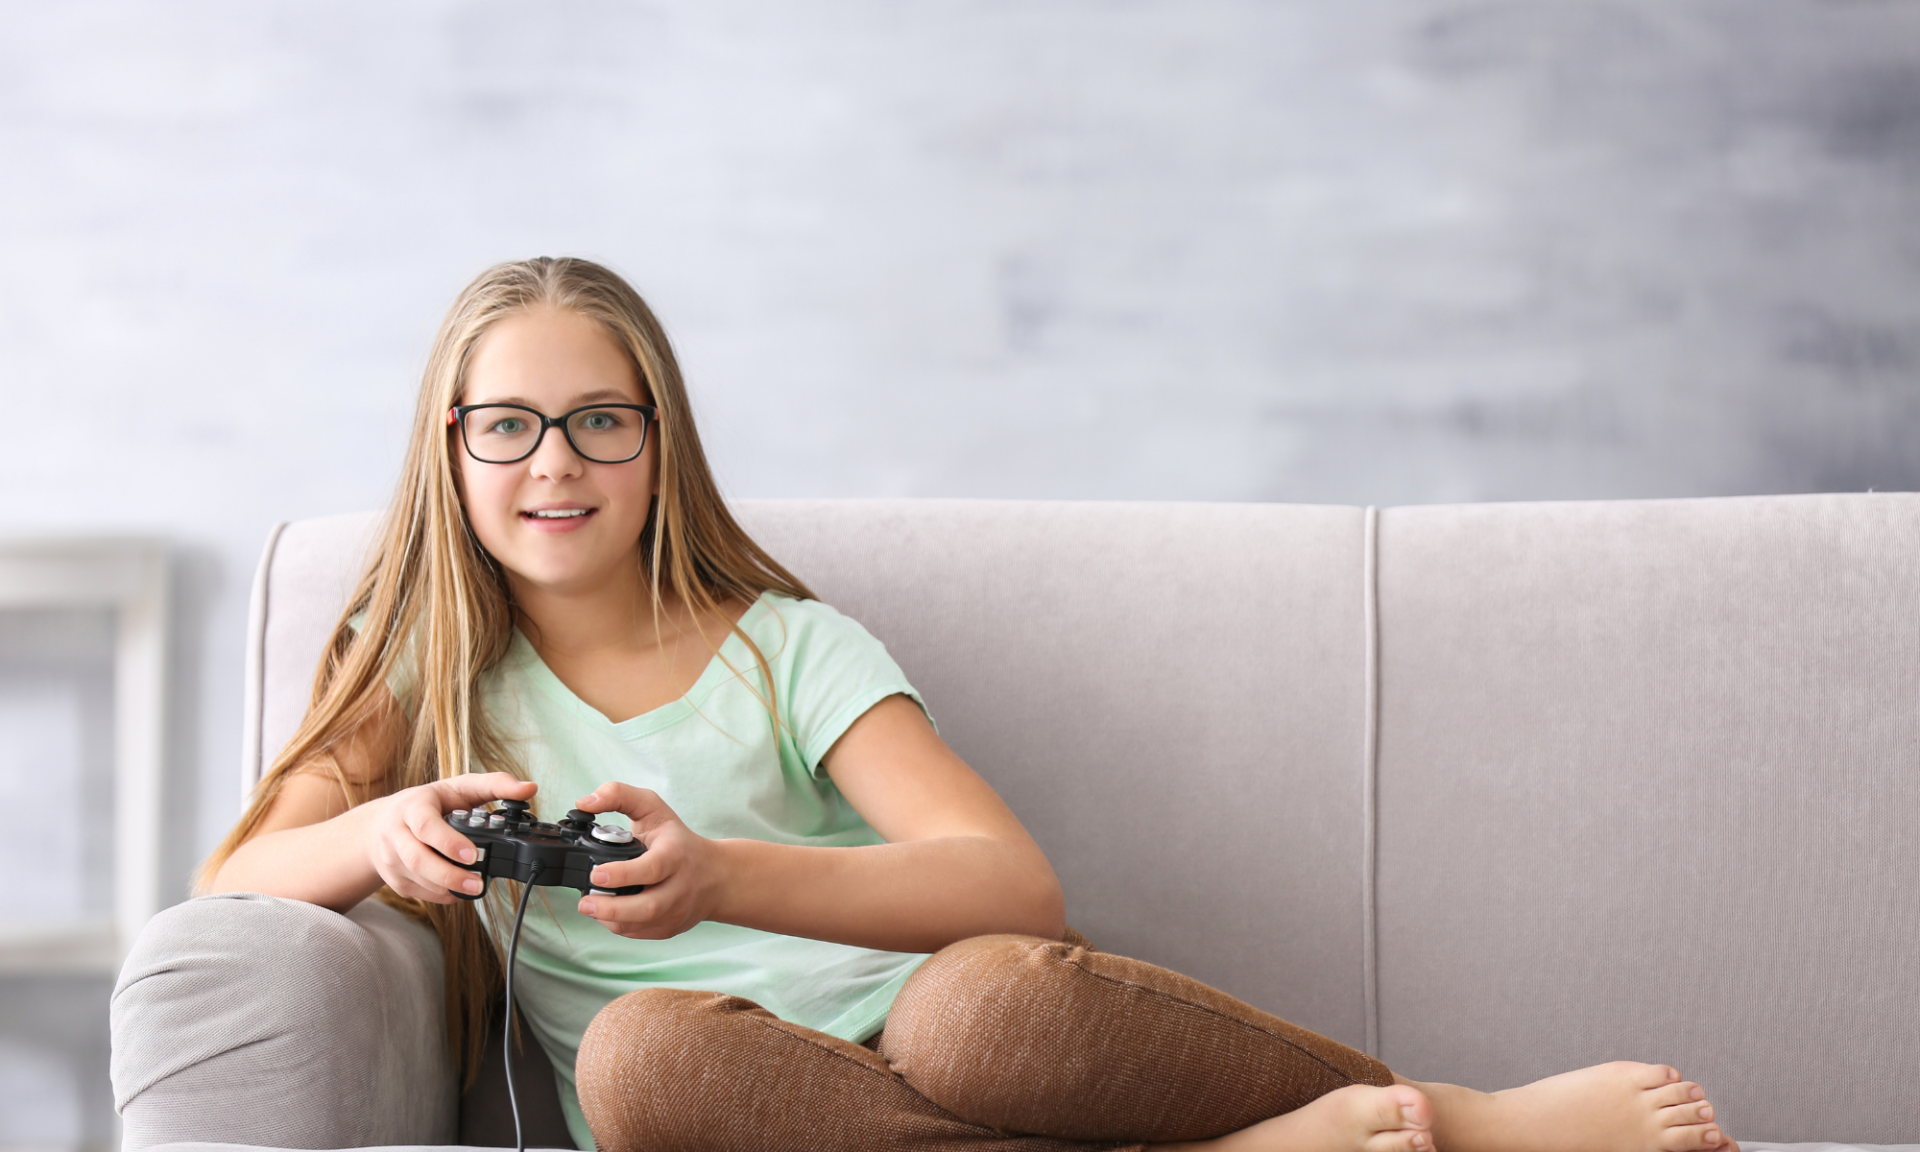 A girl curls up on a couch holding a video game controller.